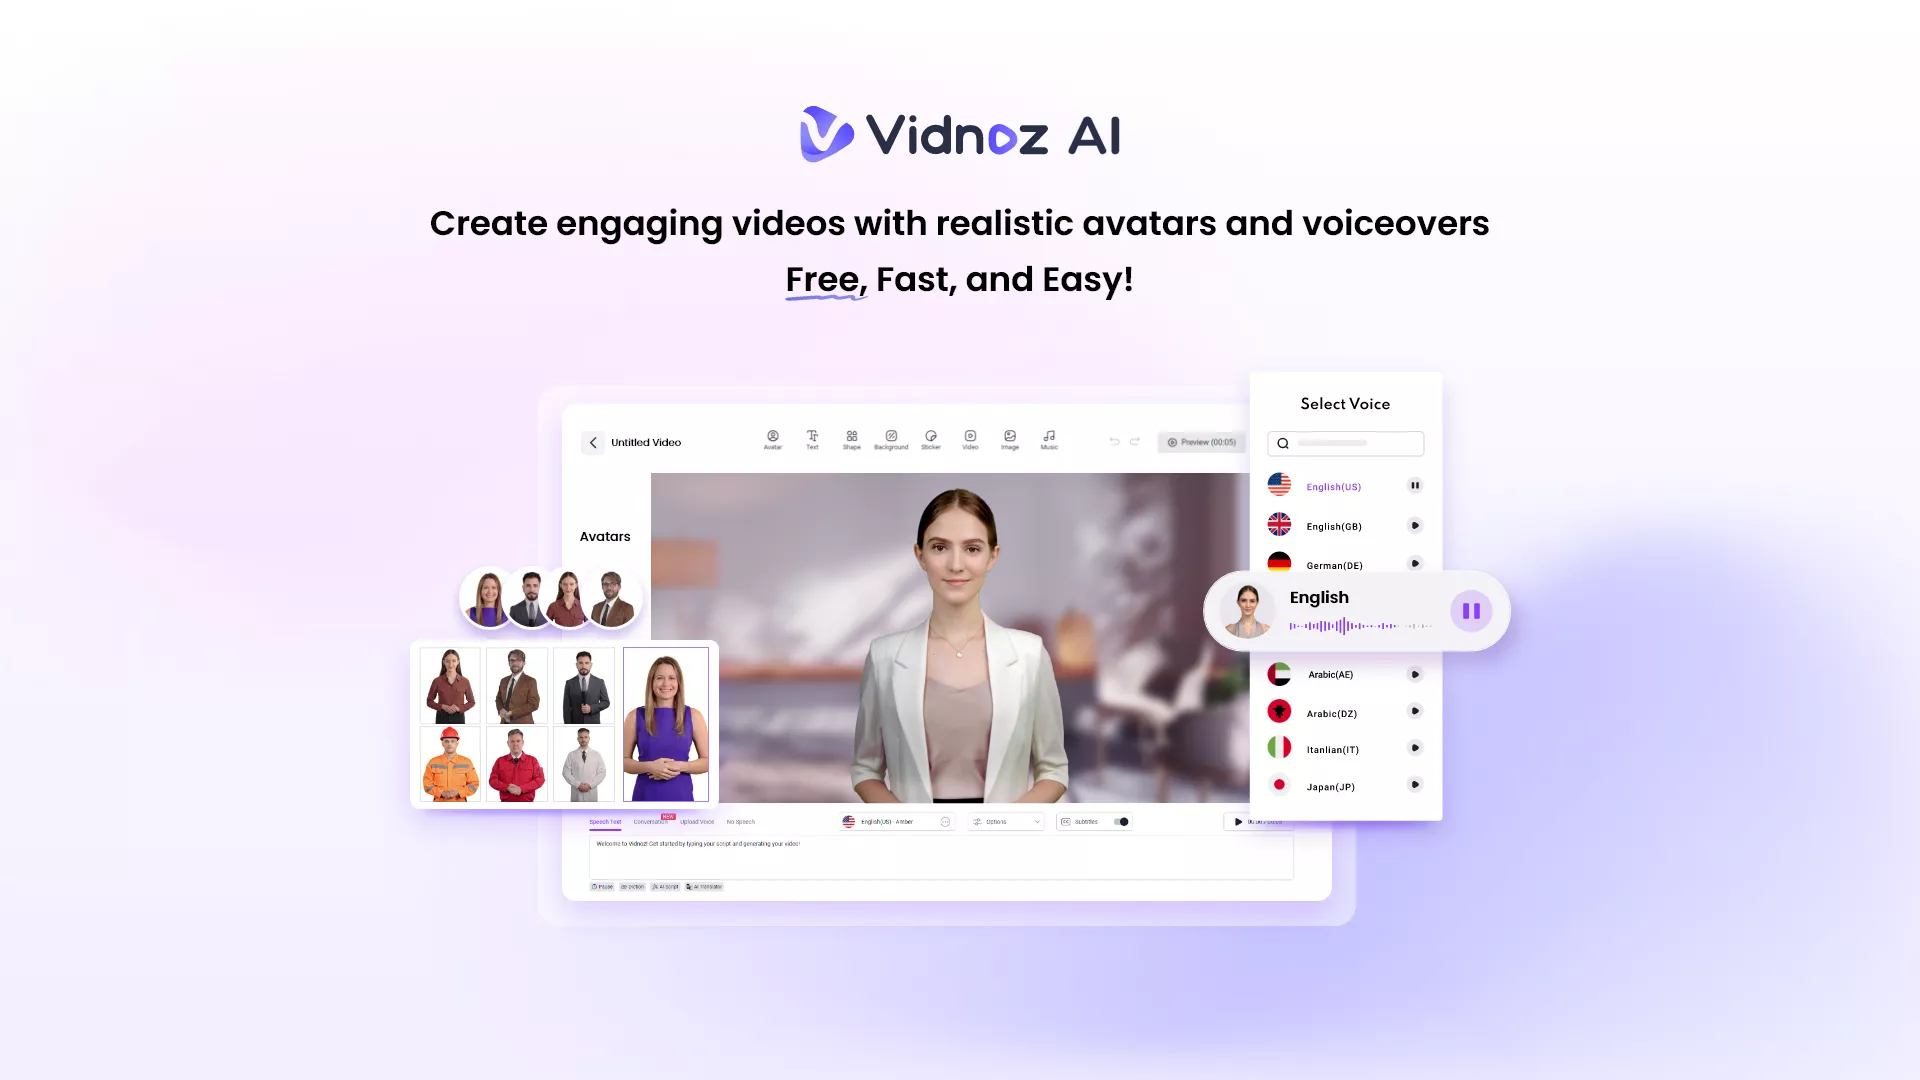 Image of the Vidnoz AI Home page